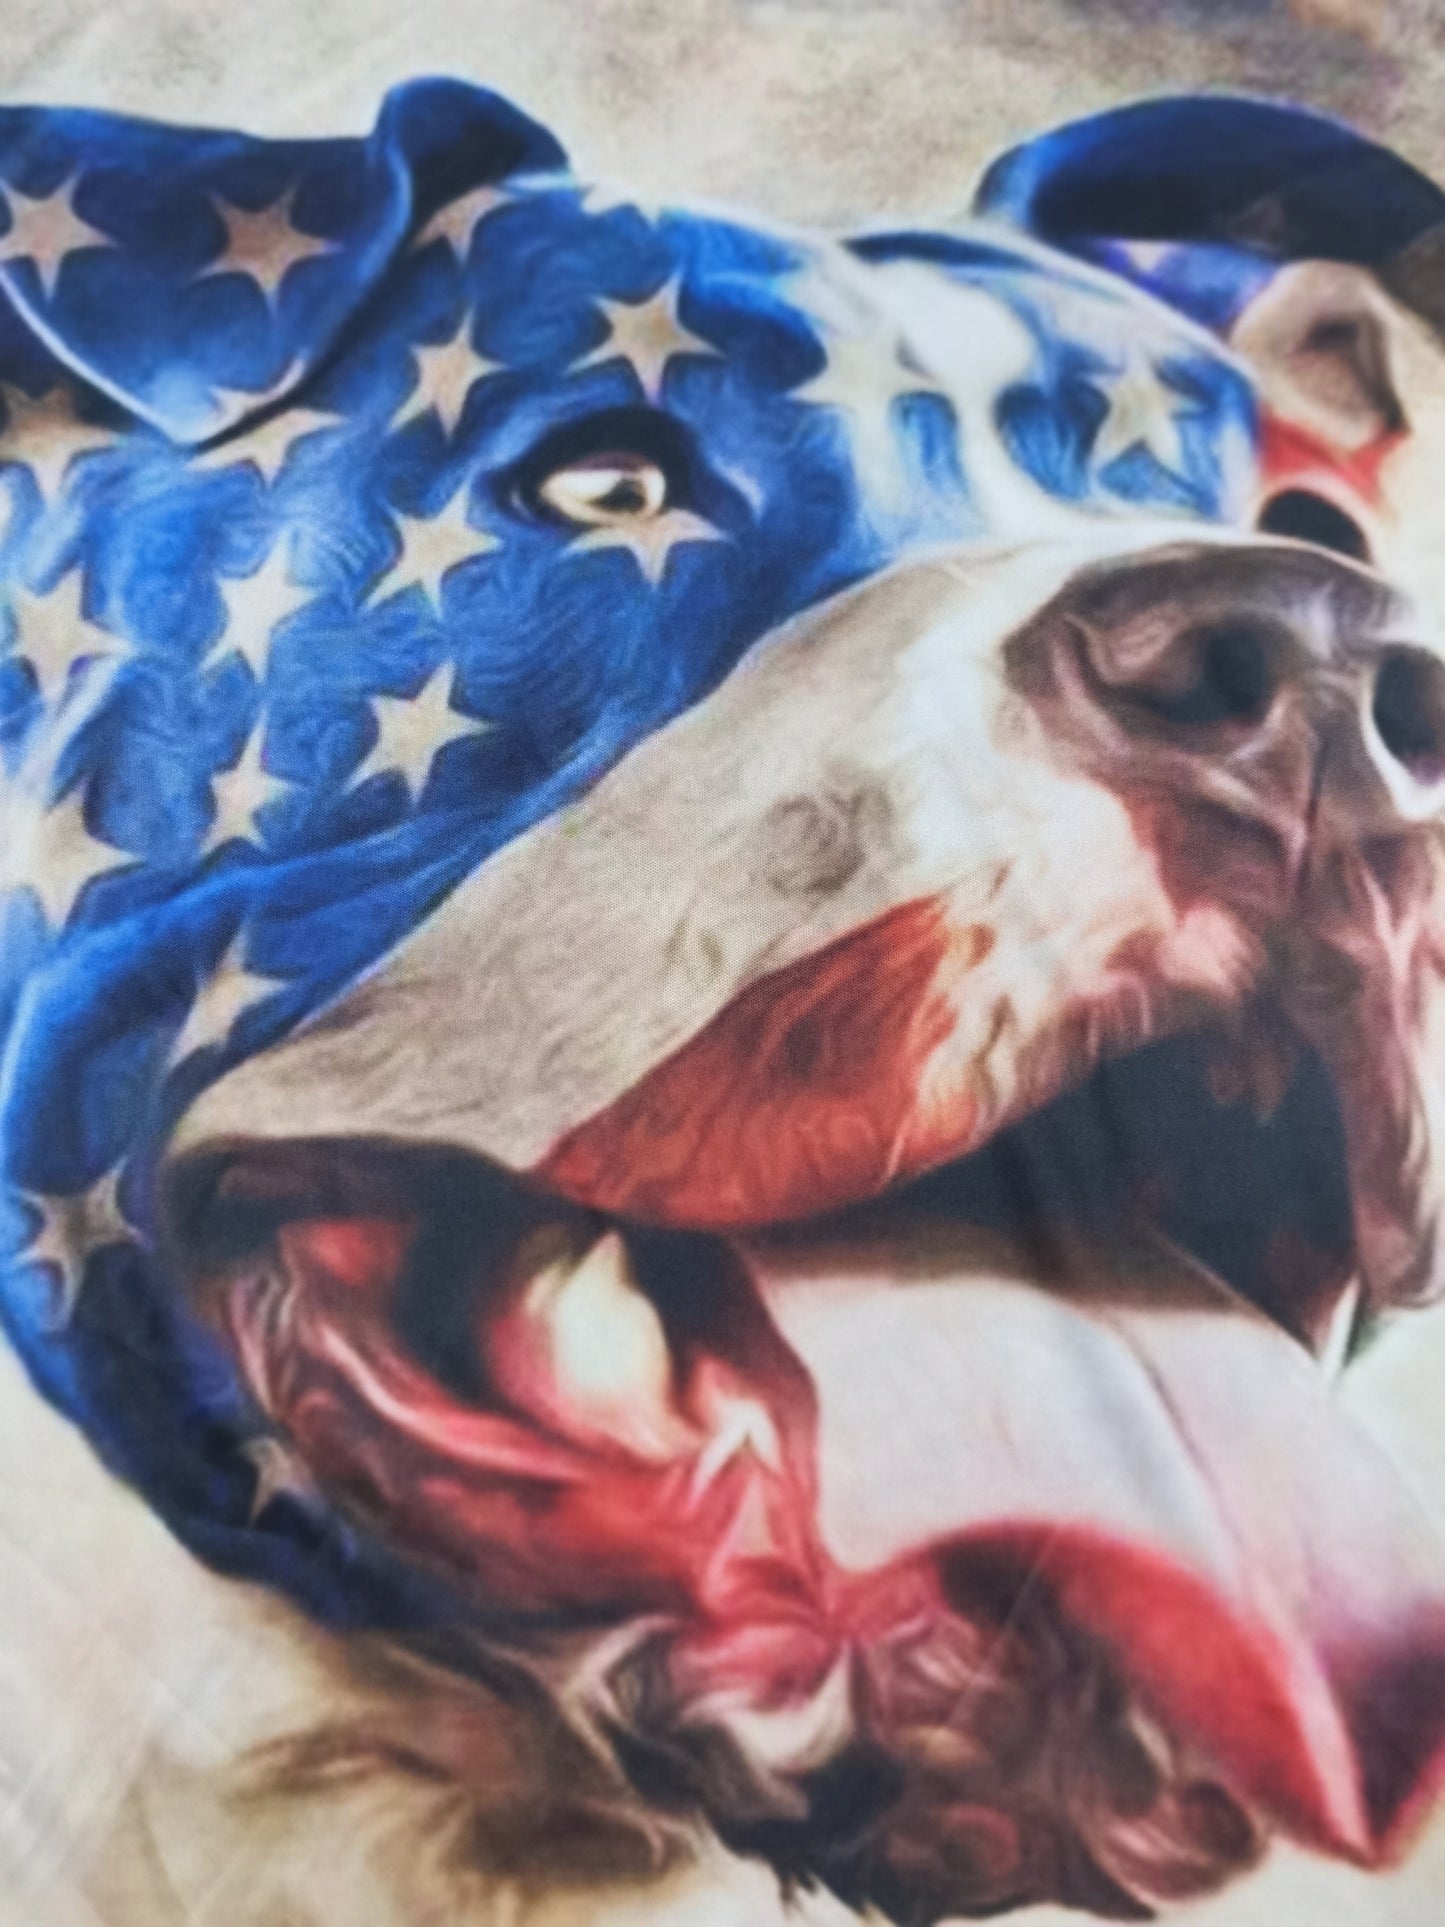 Dog And American Flag Theme, Men's Novelty T-shirt, Trendy Vintage Tees For Summer